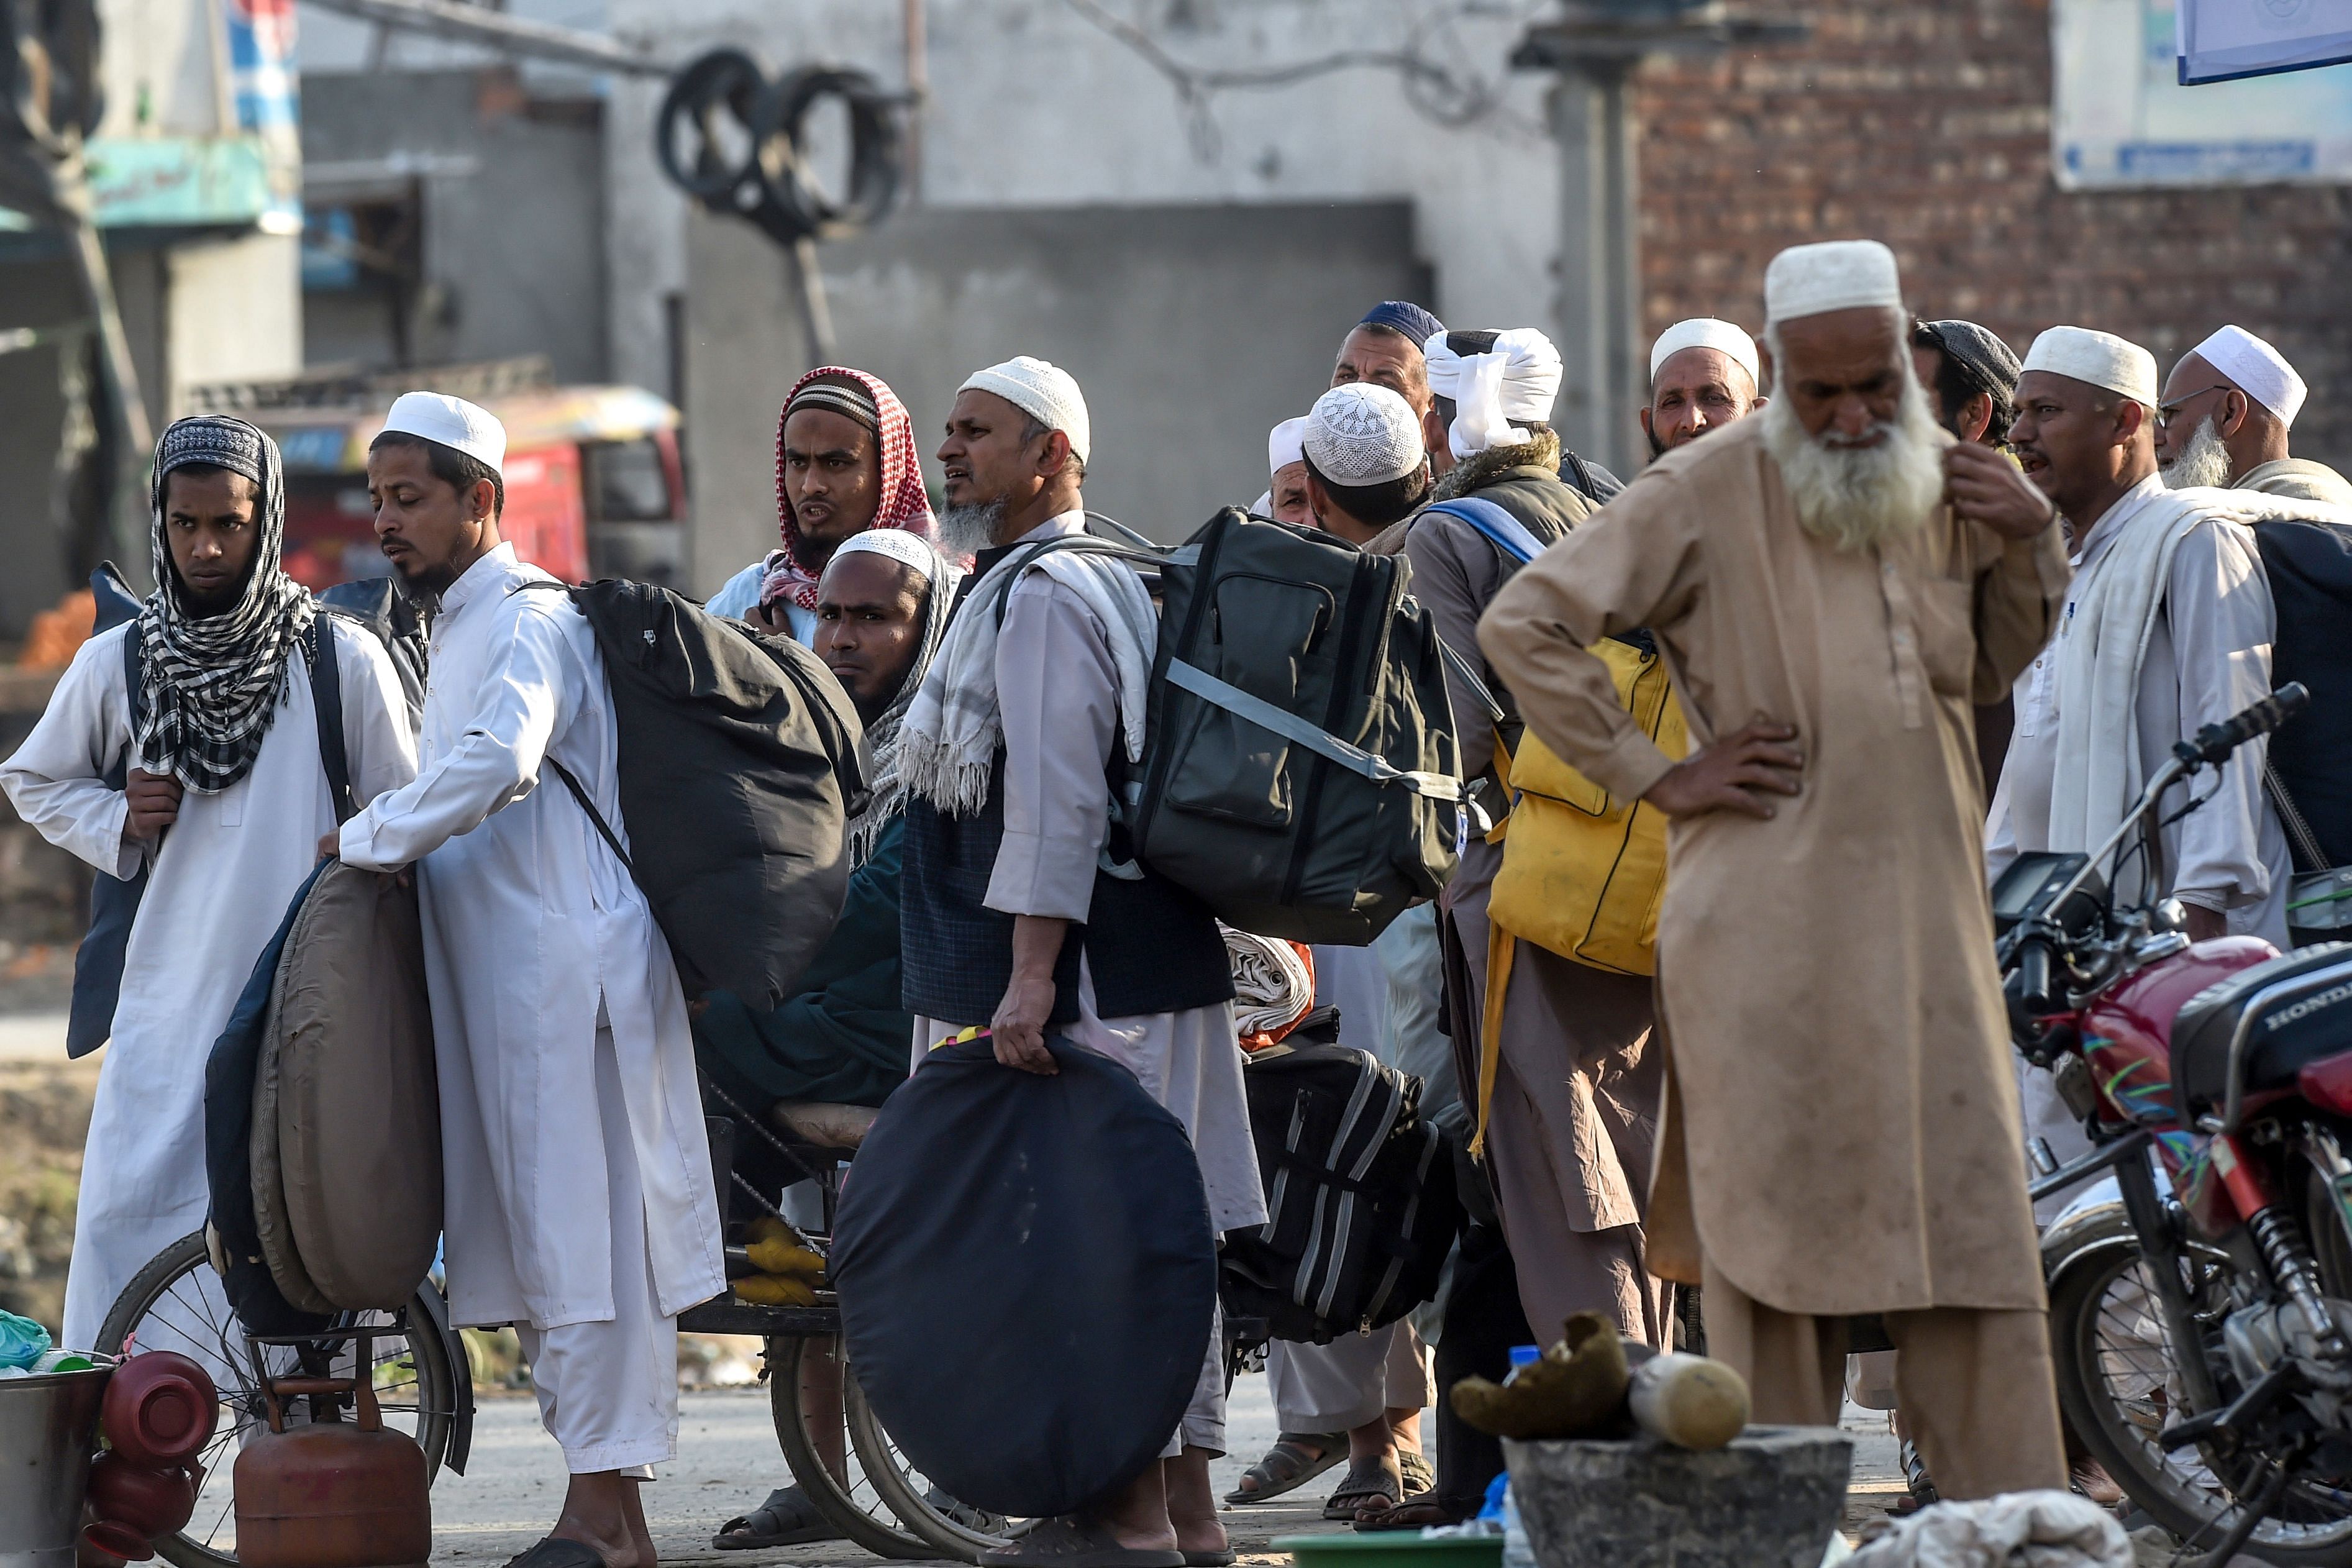 Islamic worshippers prepare for their departure to their home from the three-day annual Tablighi Ijtema religious gathering. (AFP Photo)